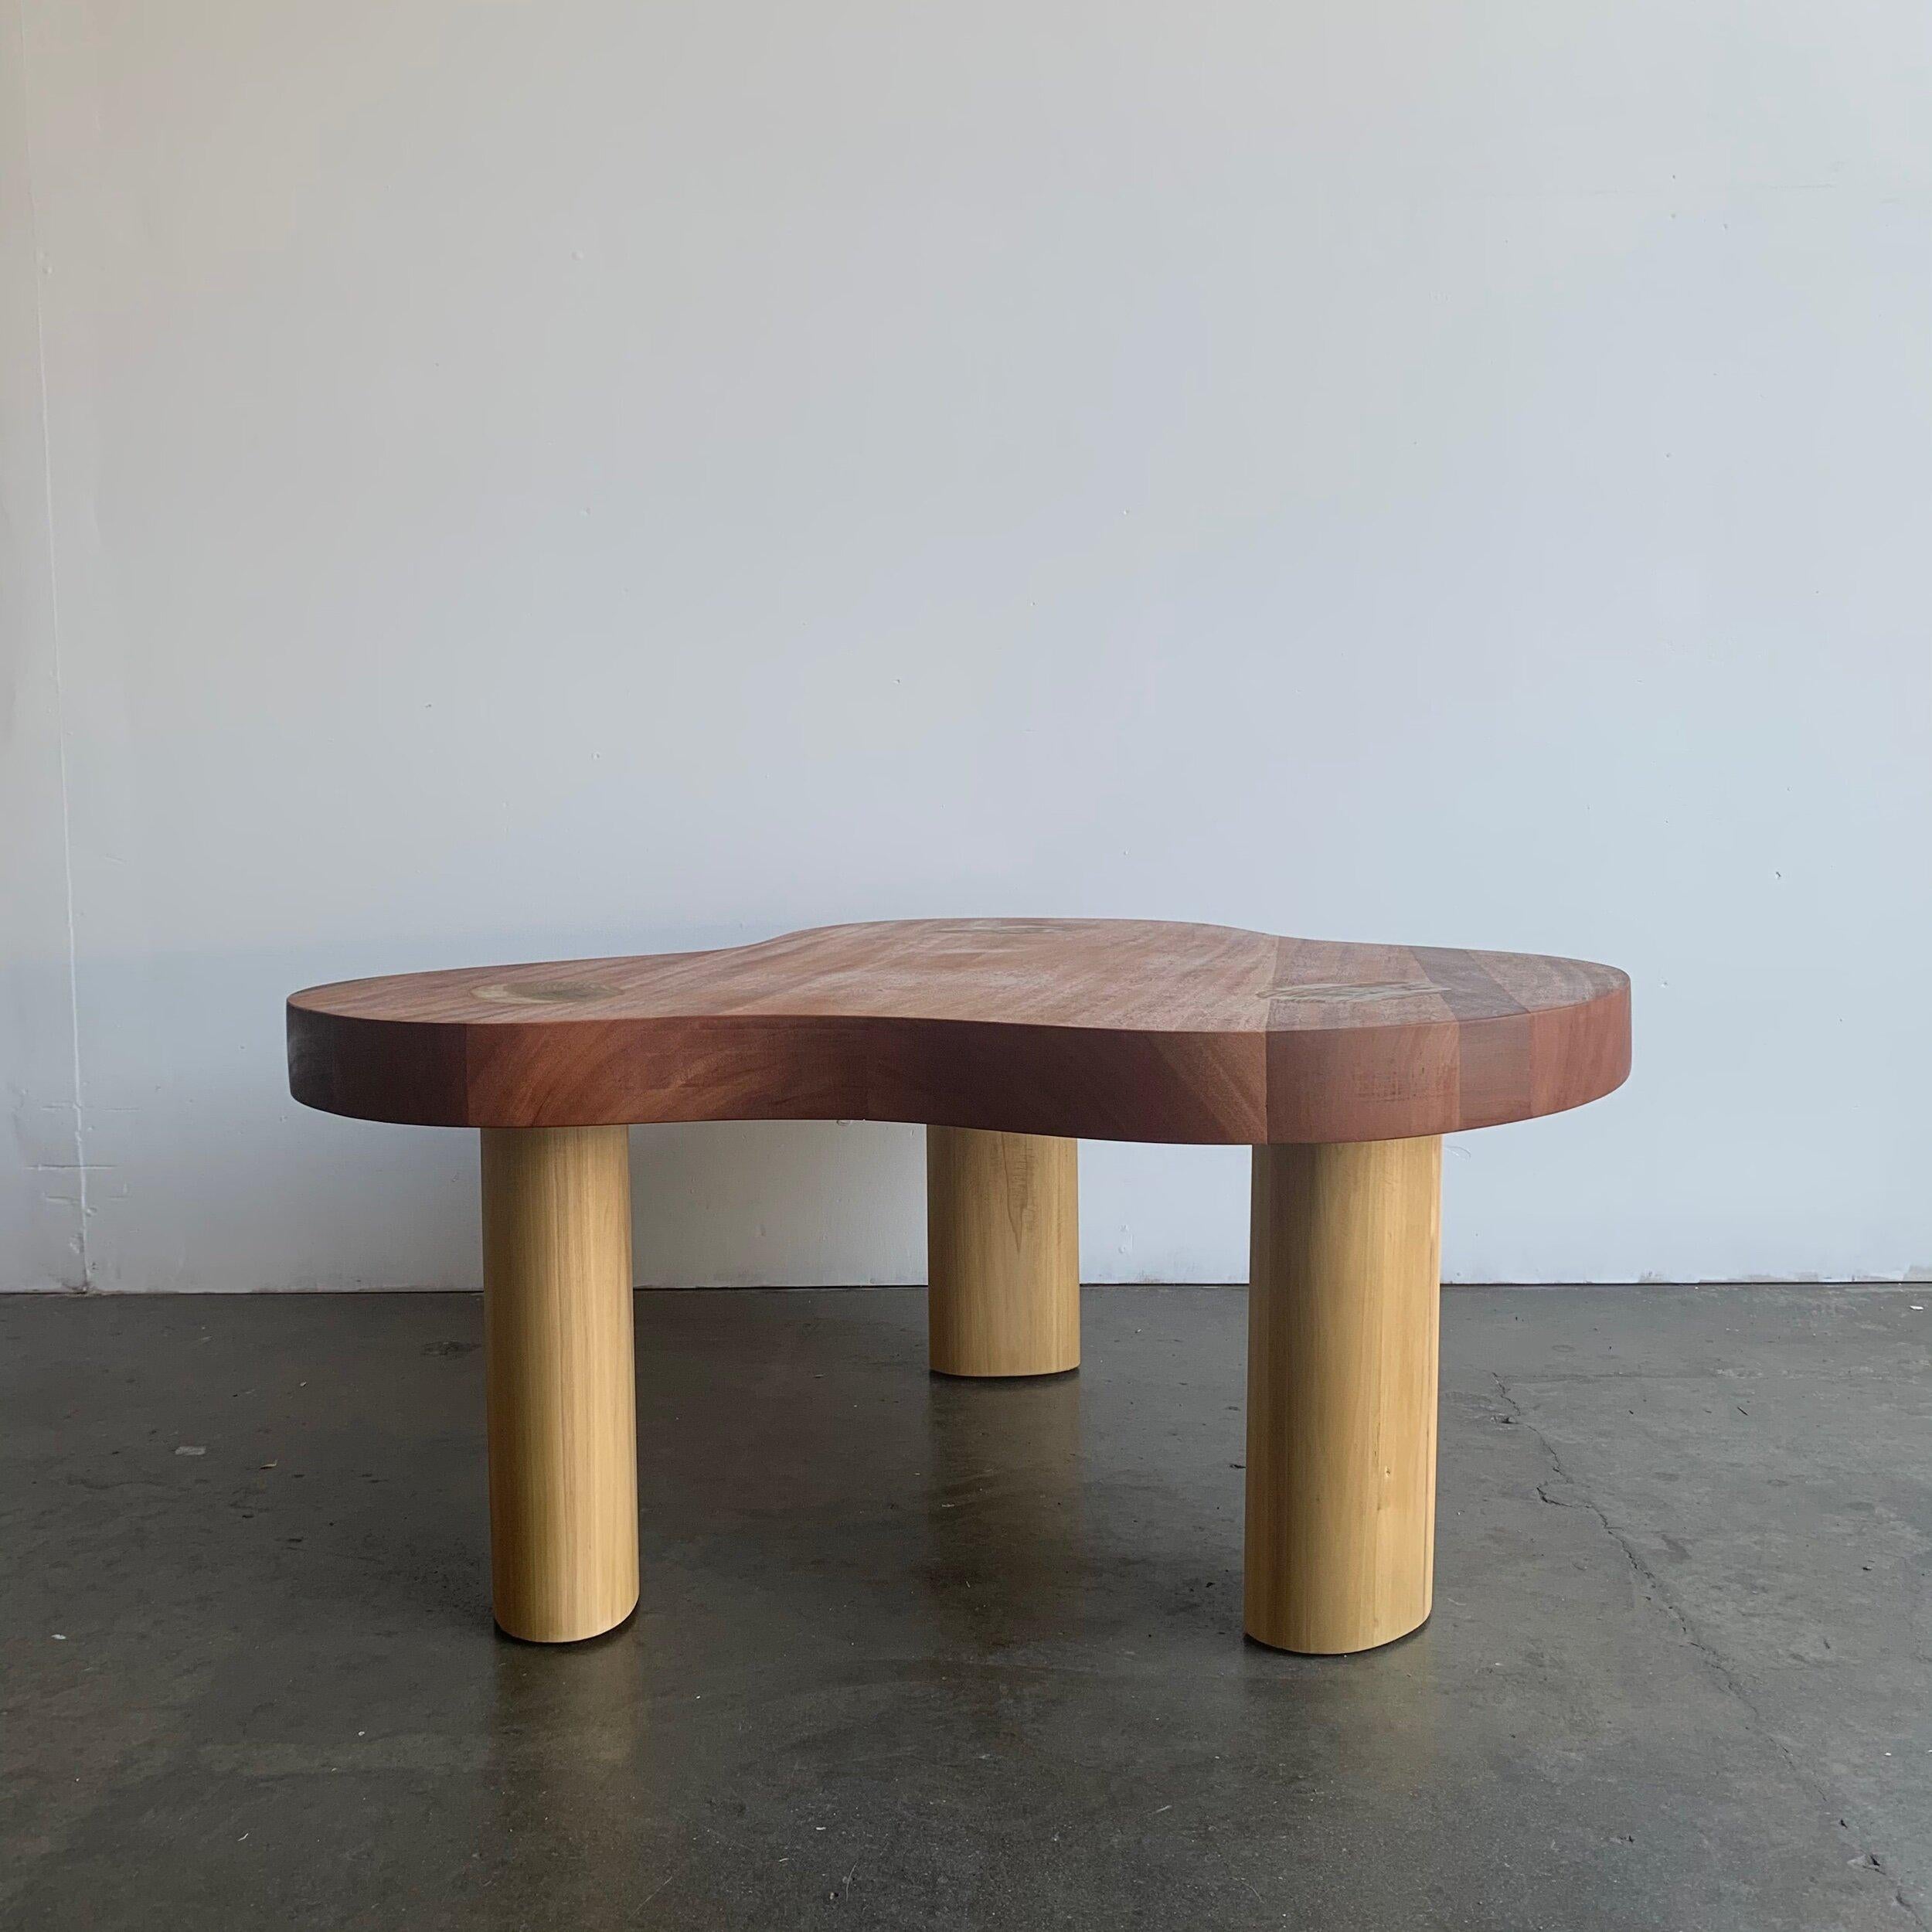 Handcrafted coffee table by Vintgae On Point. Made in Solid Mahogany with solid poplar legs. This coffee table offers a great amorphous shape with legs that are exposed all the way to the surface. Coffee table has a clear coat finish with NO stain